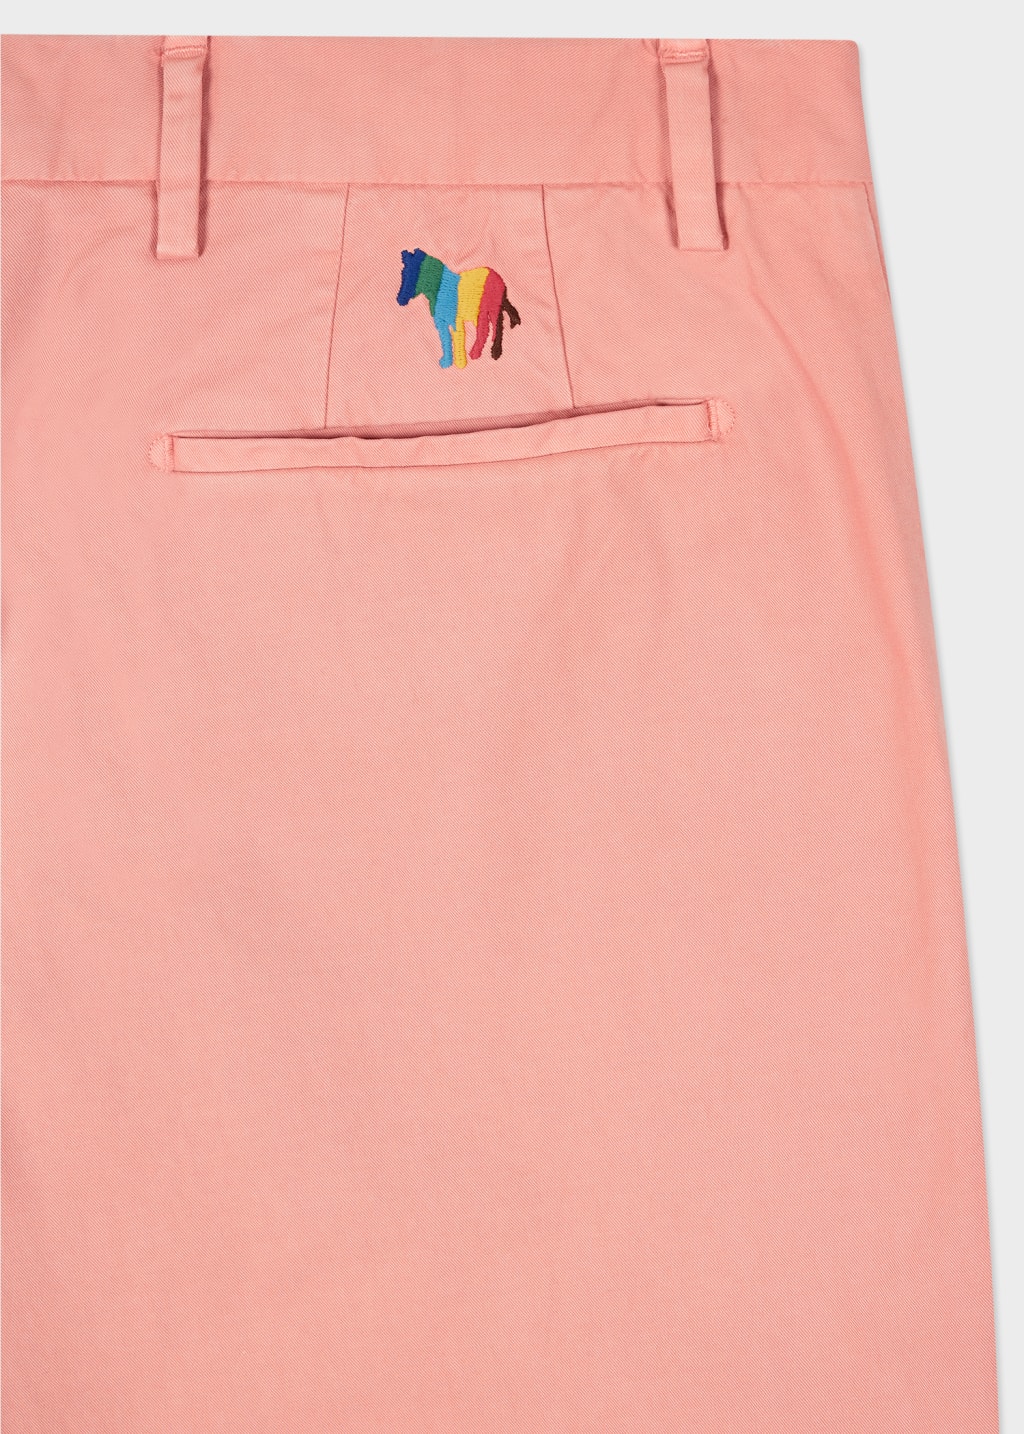 Detail View - Pink Mid-Fit Organic-Cotton Blend Chinos Paul Smith